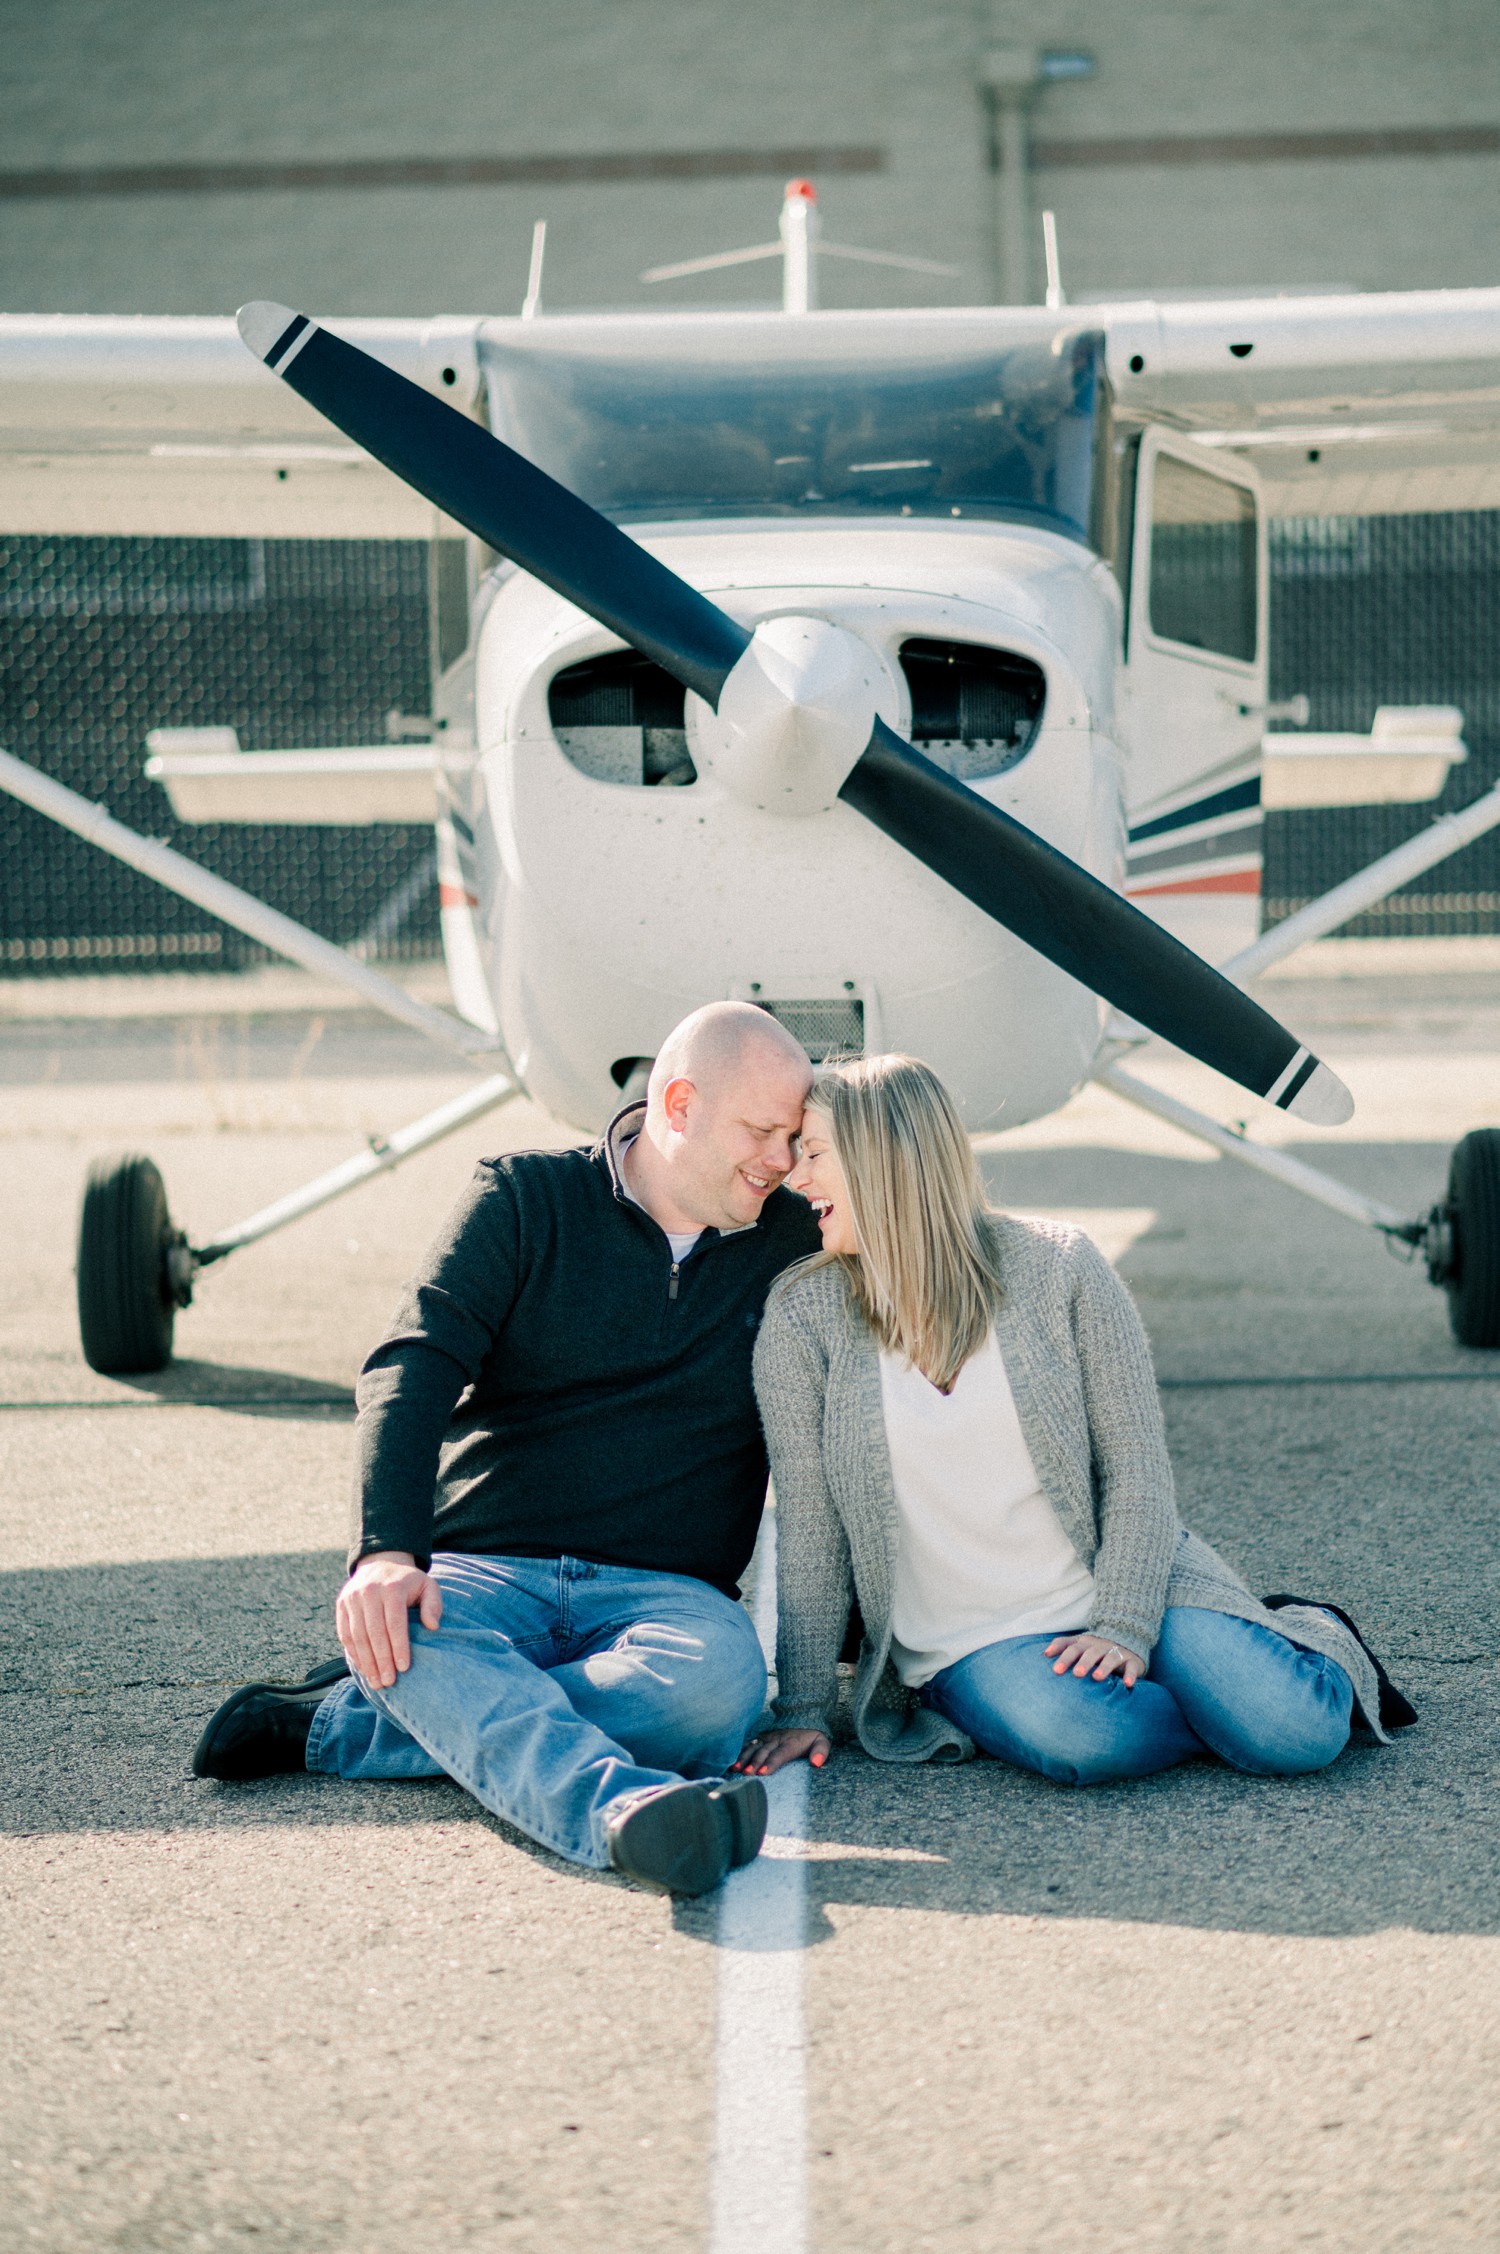 Engagement photos in front of airplane propeller.